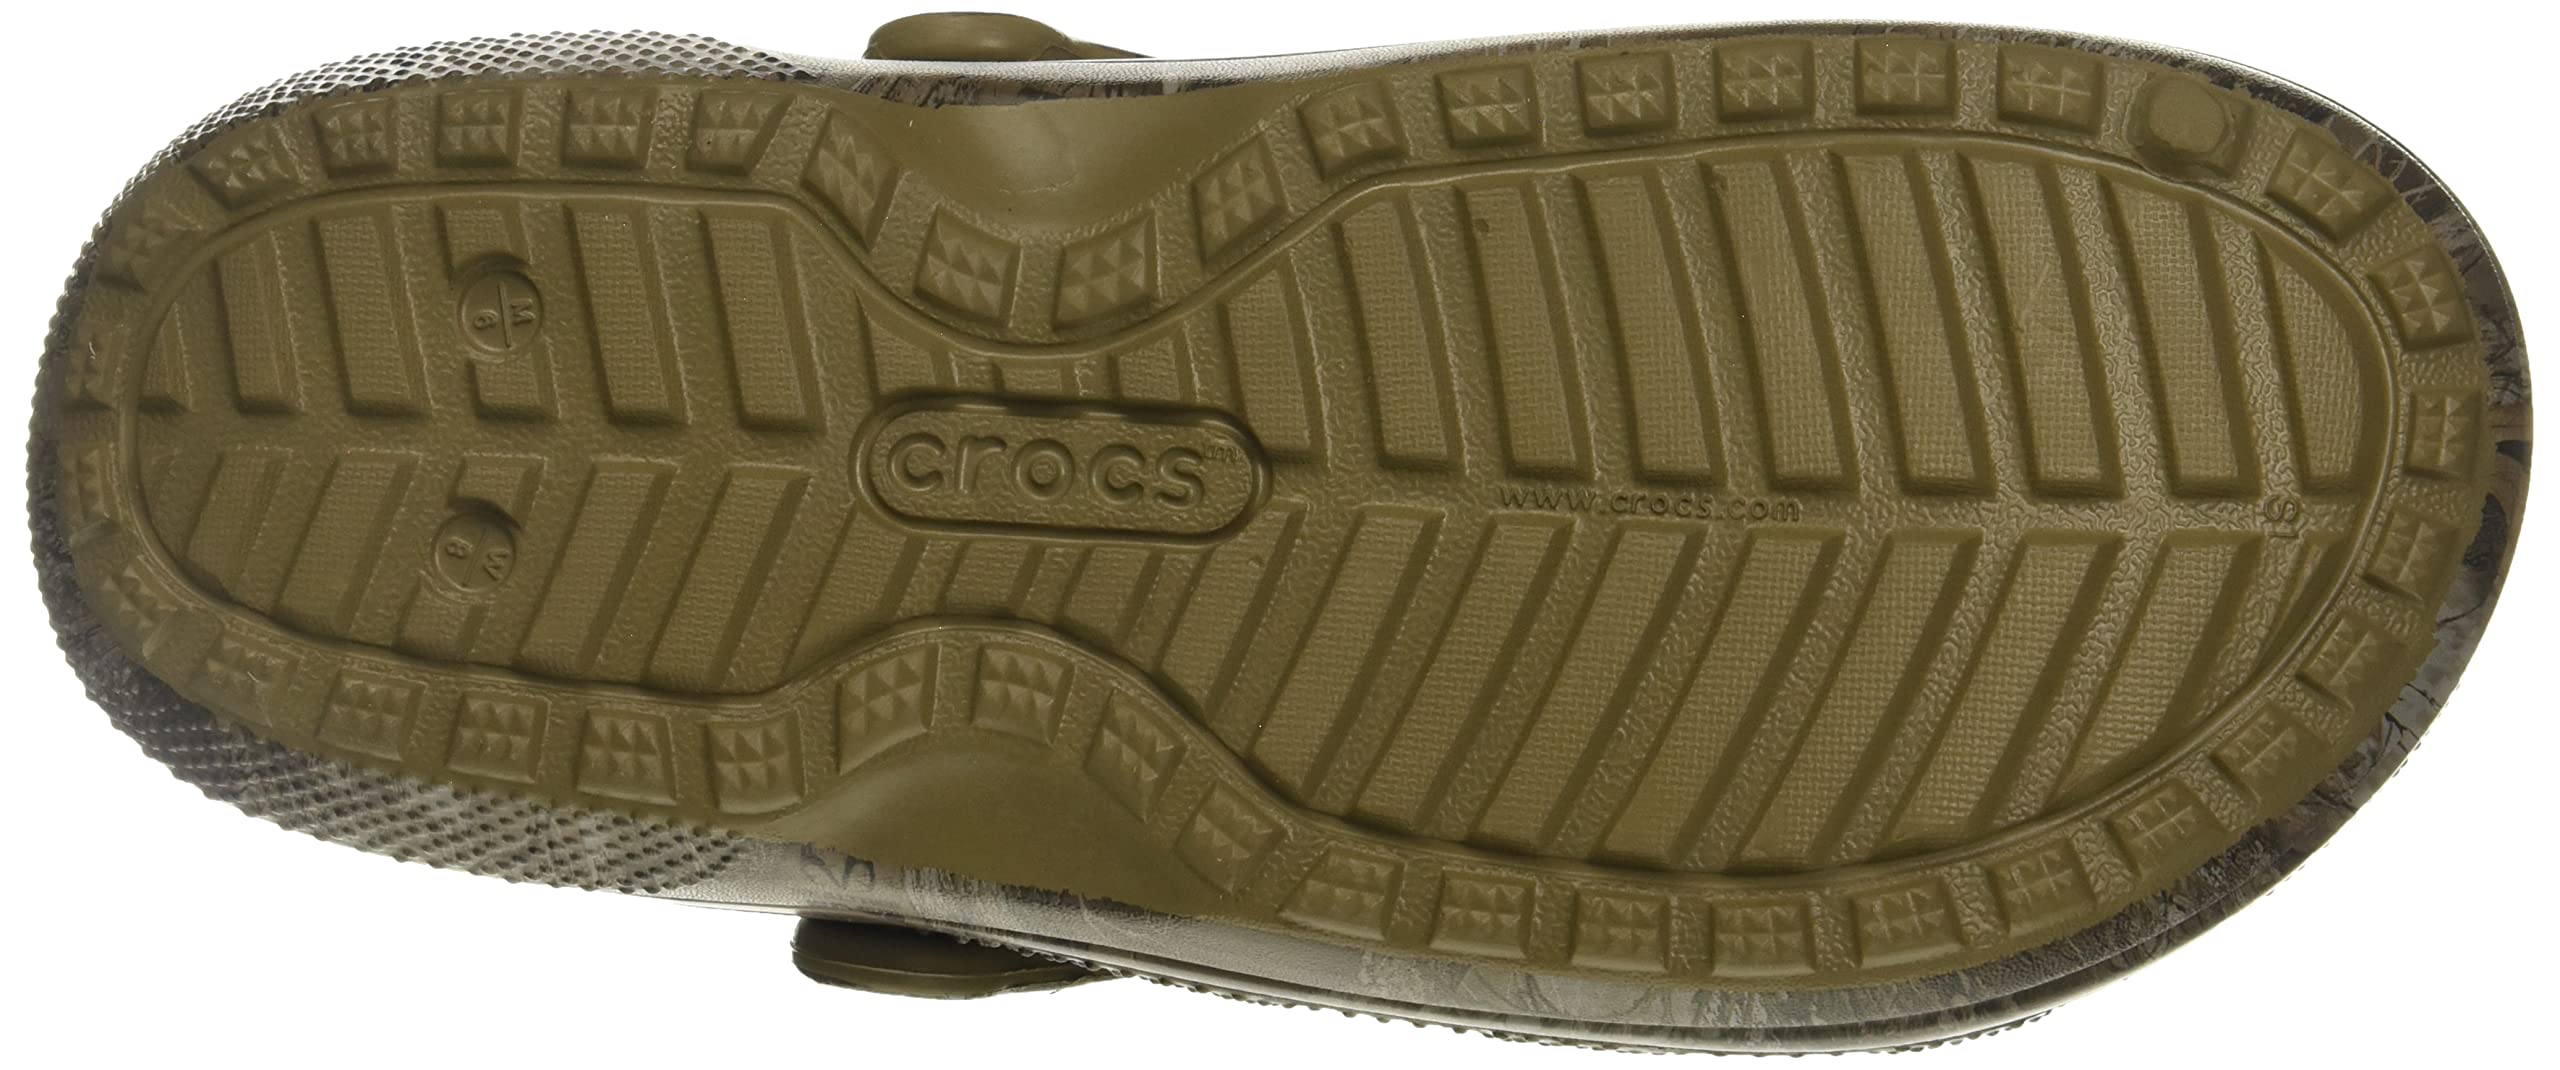 Crocs unisex-adult Men's and Women's Classic Lined Clog | Fuzzy Slippers